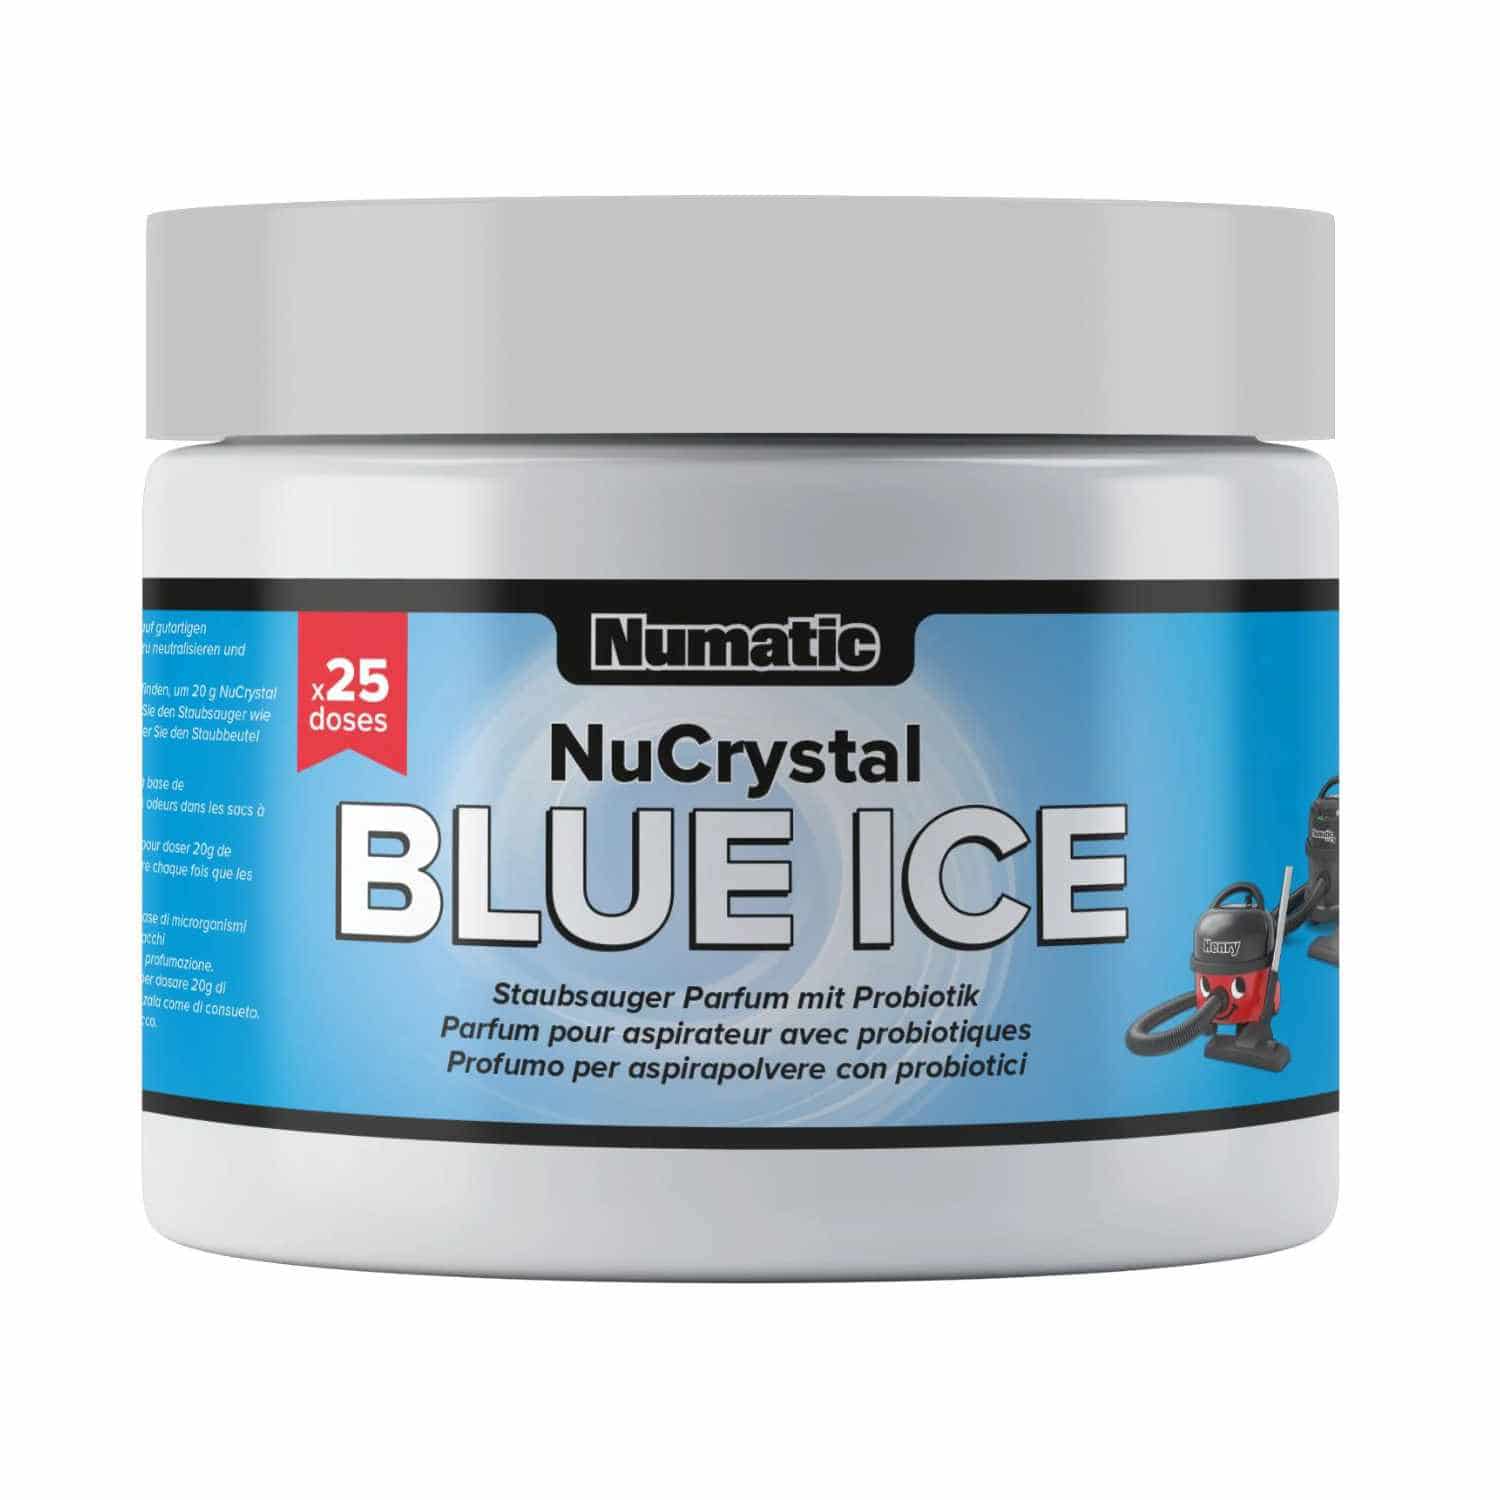 NuCrystal Staubsauger-Deo "Blue Ice" 